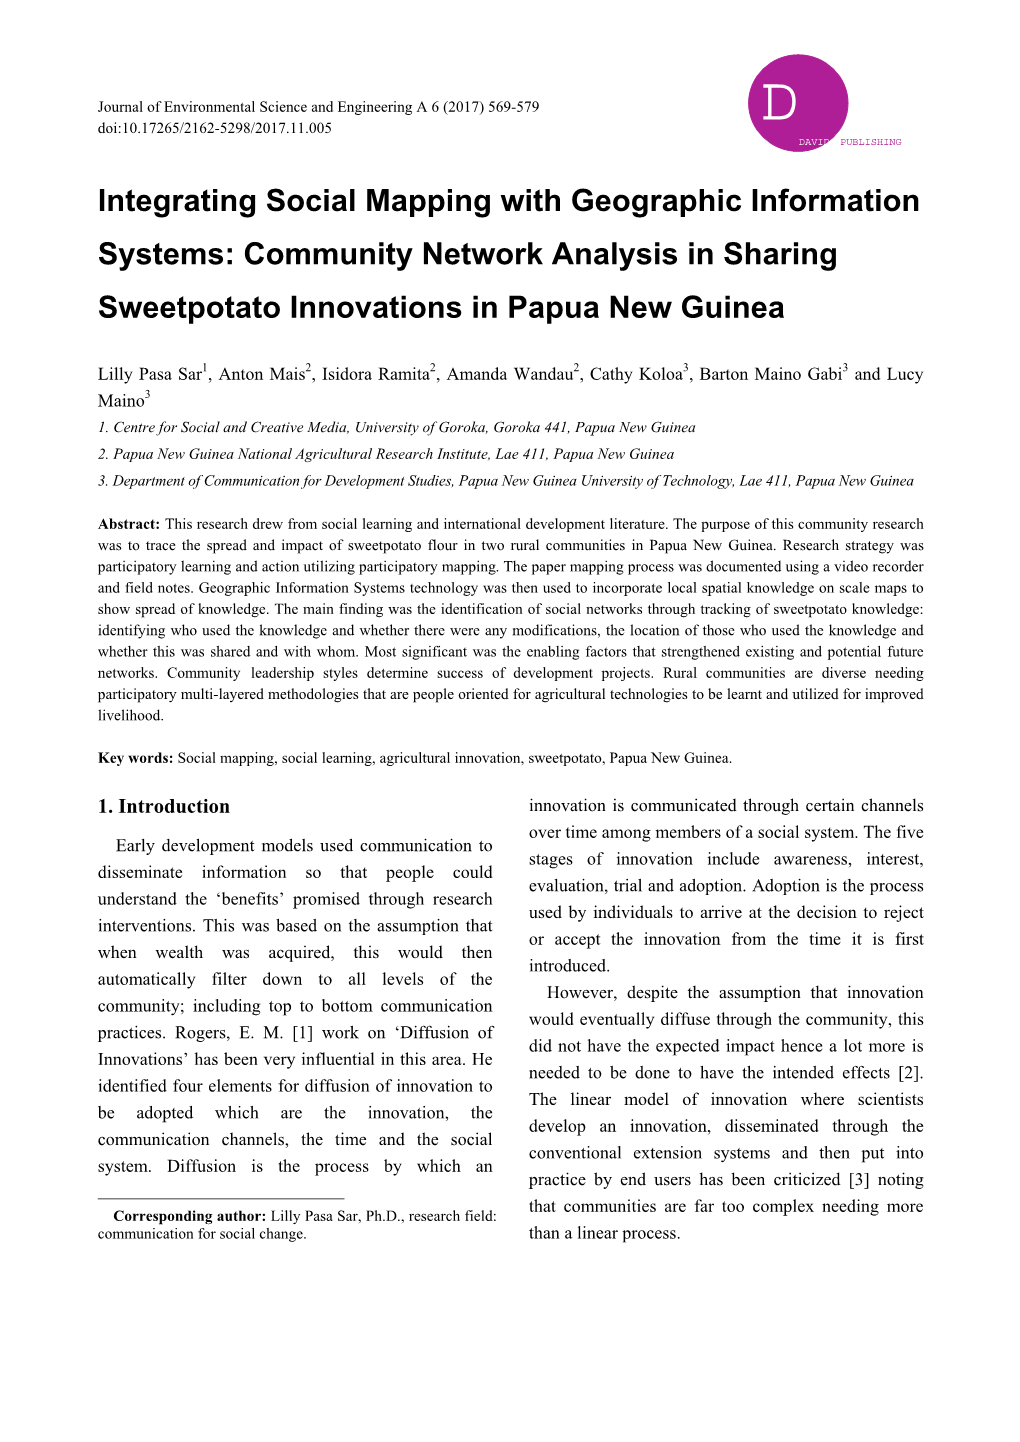 Integrating Social Mapping with Geographic Information Systems: Community Network Analysis in Sharing Sweetpotato Innovations in Papua New Guinea